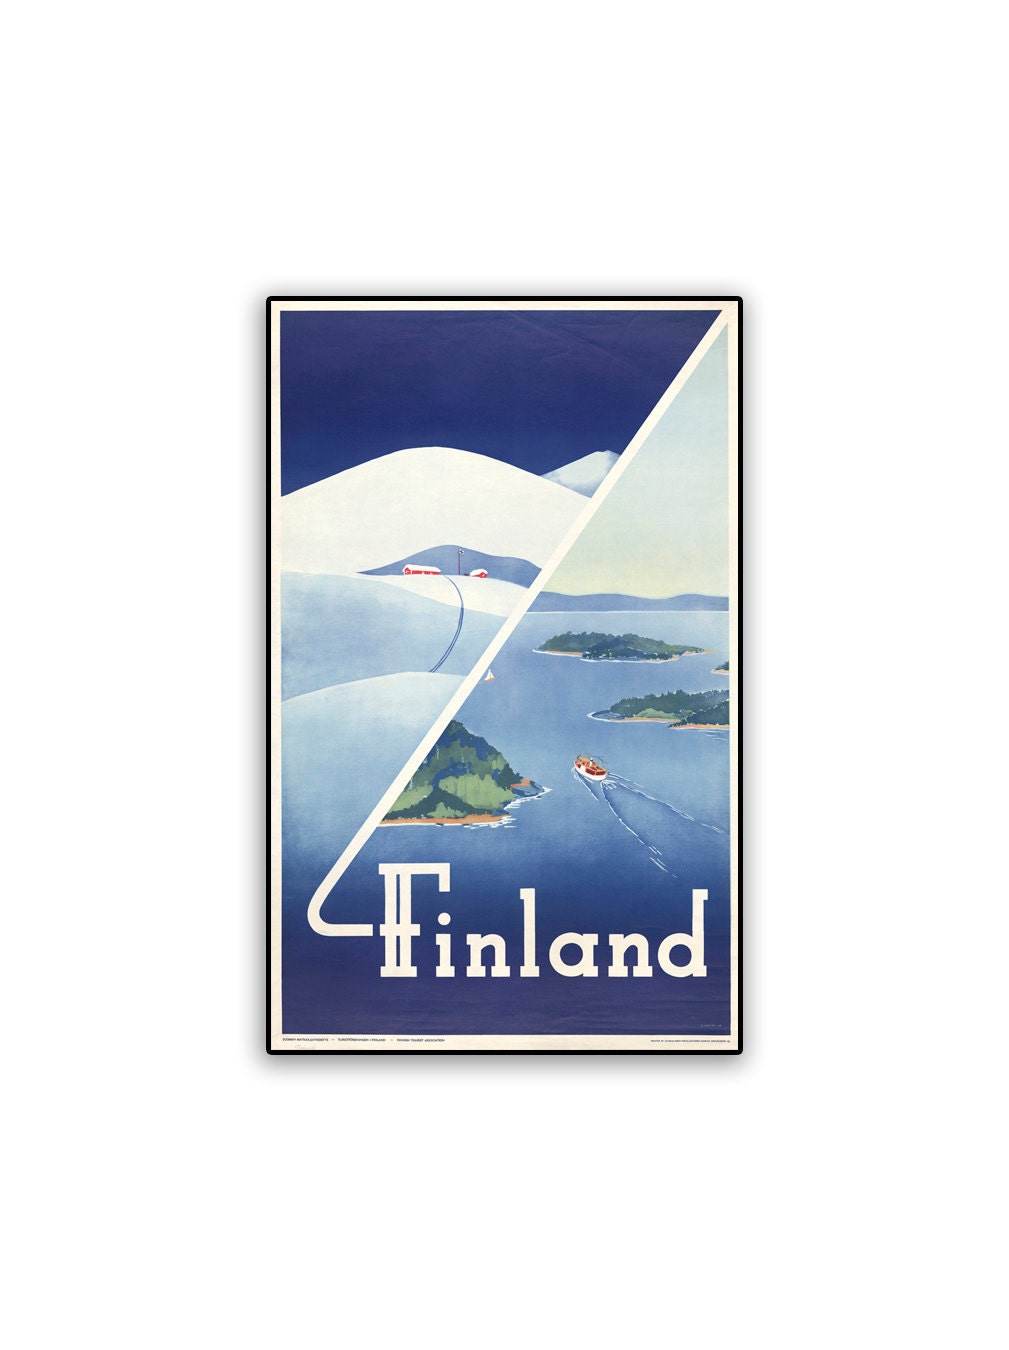 Finland Vintage Travel Poster Reprint on 8x13 PopMount Ready to Hang